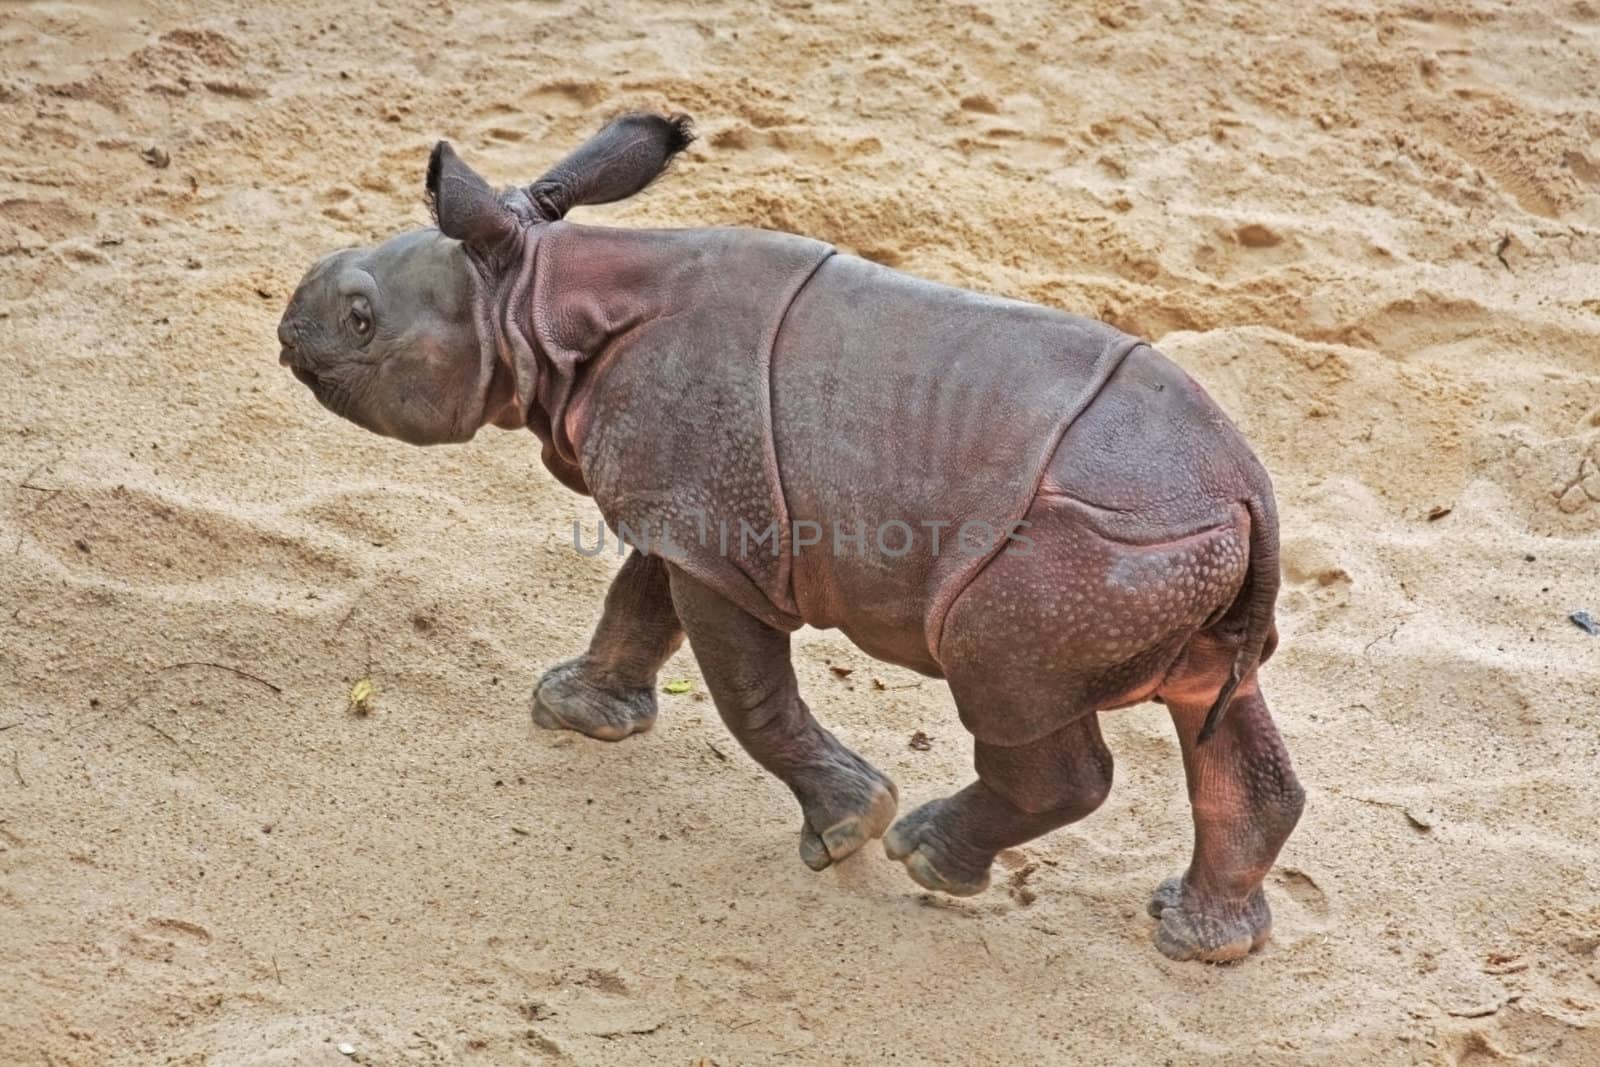 This image shows a 3 days old rhino baby in a zoo